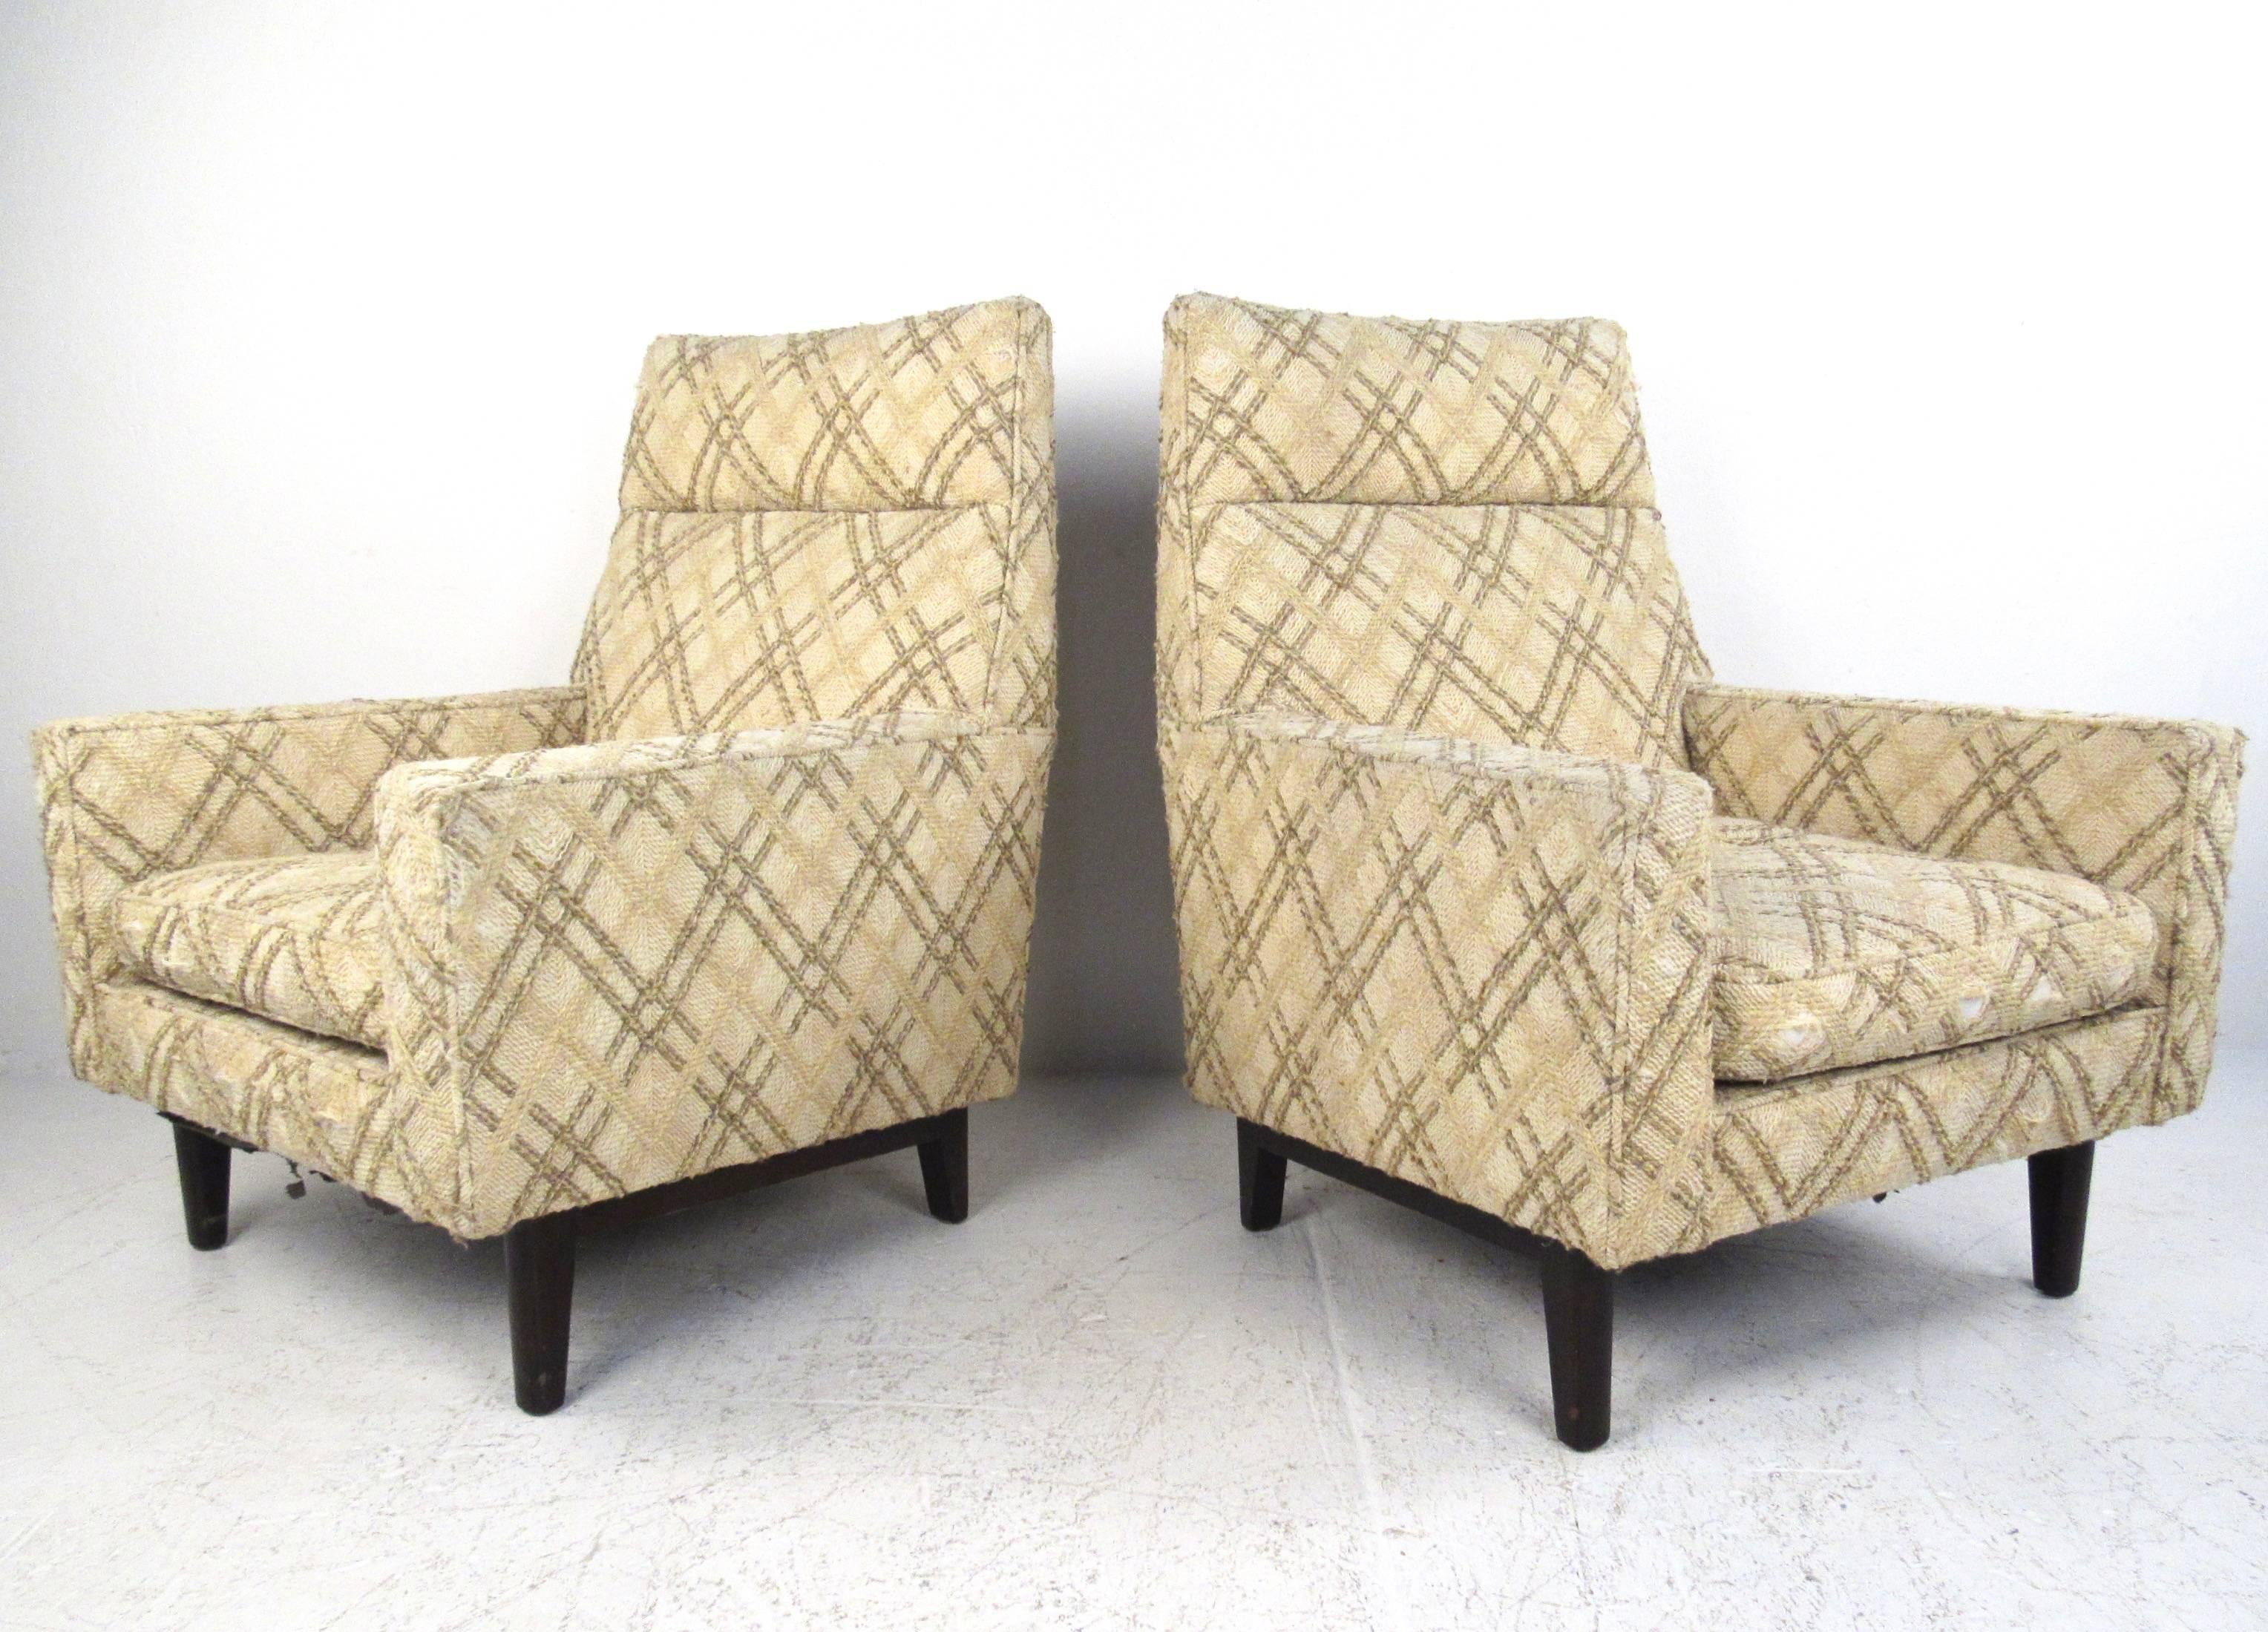 This pair of 1950s high back lounge chairs by Edward Wormley for Dunbar features iconic Mid-Century design and comfortably sculpted seat backs. Spacious seats with plush vintage fabric make these an ideal pair of modern chairs for any setting.